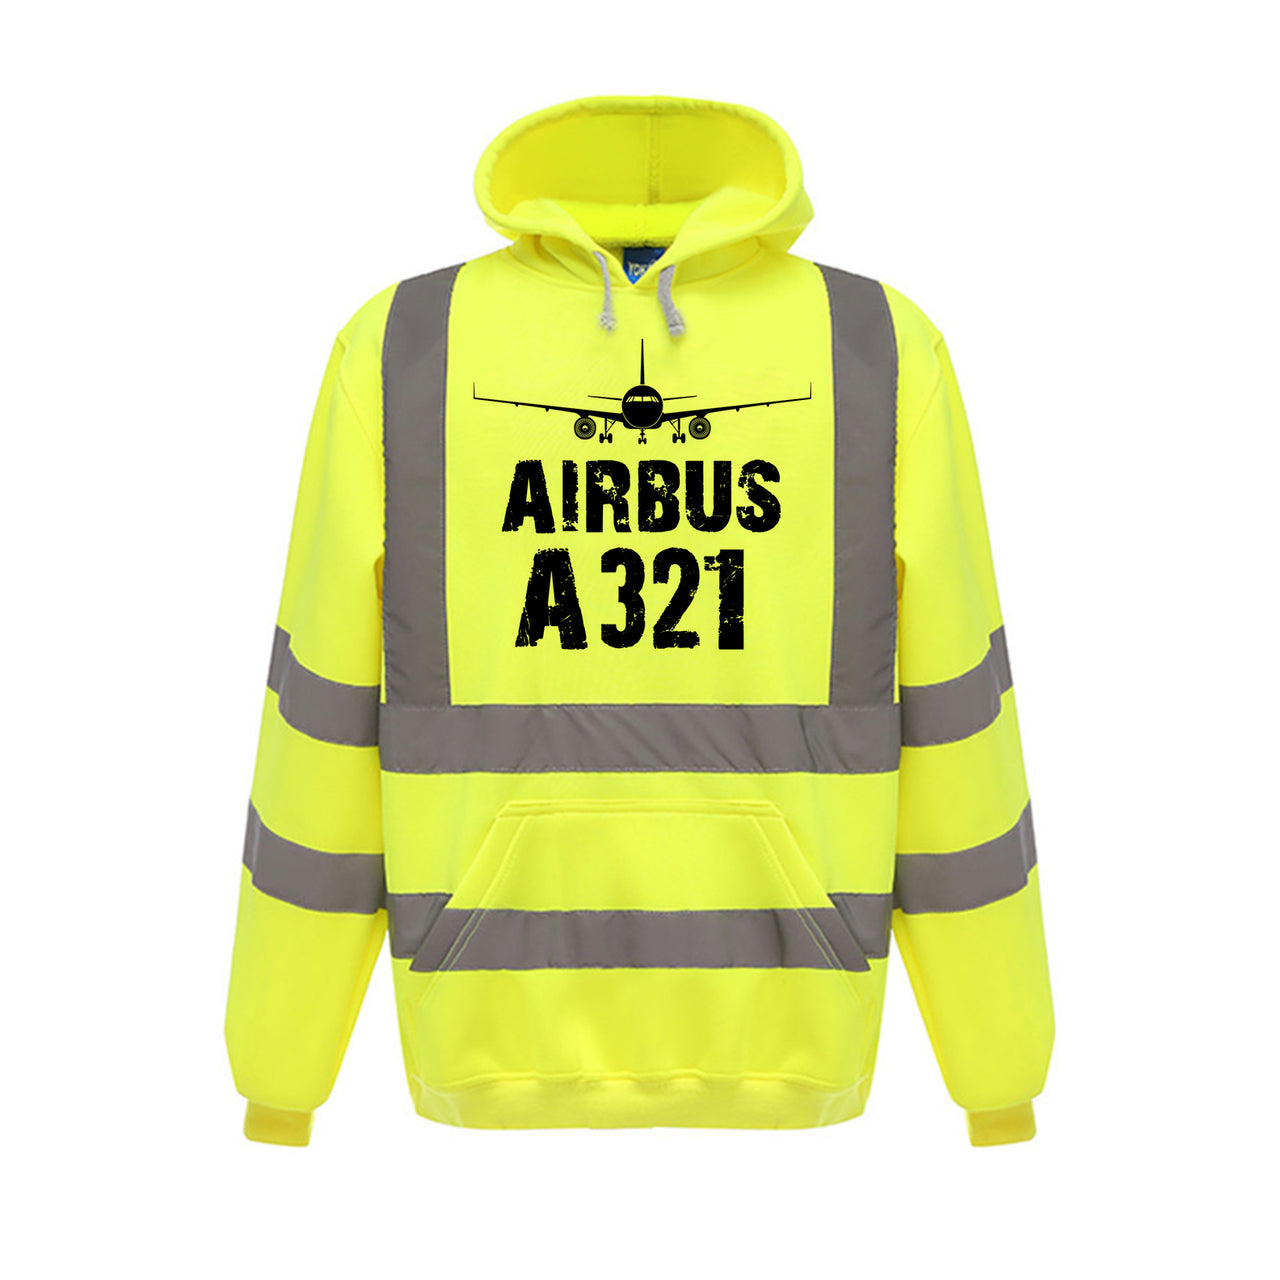 Airbus A321 & Plane Designed Reflective Hoodies